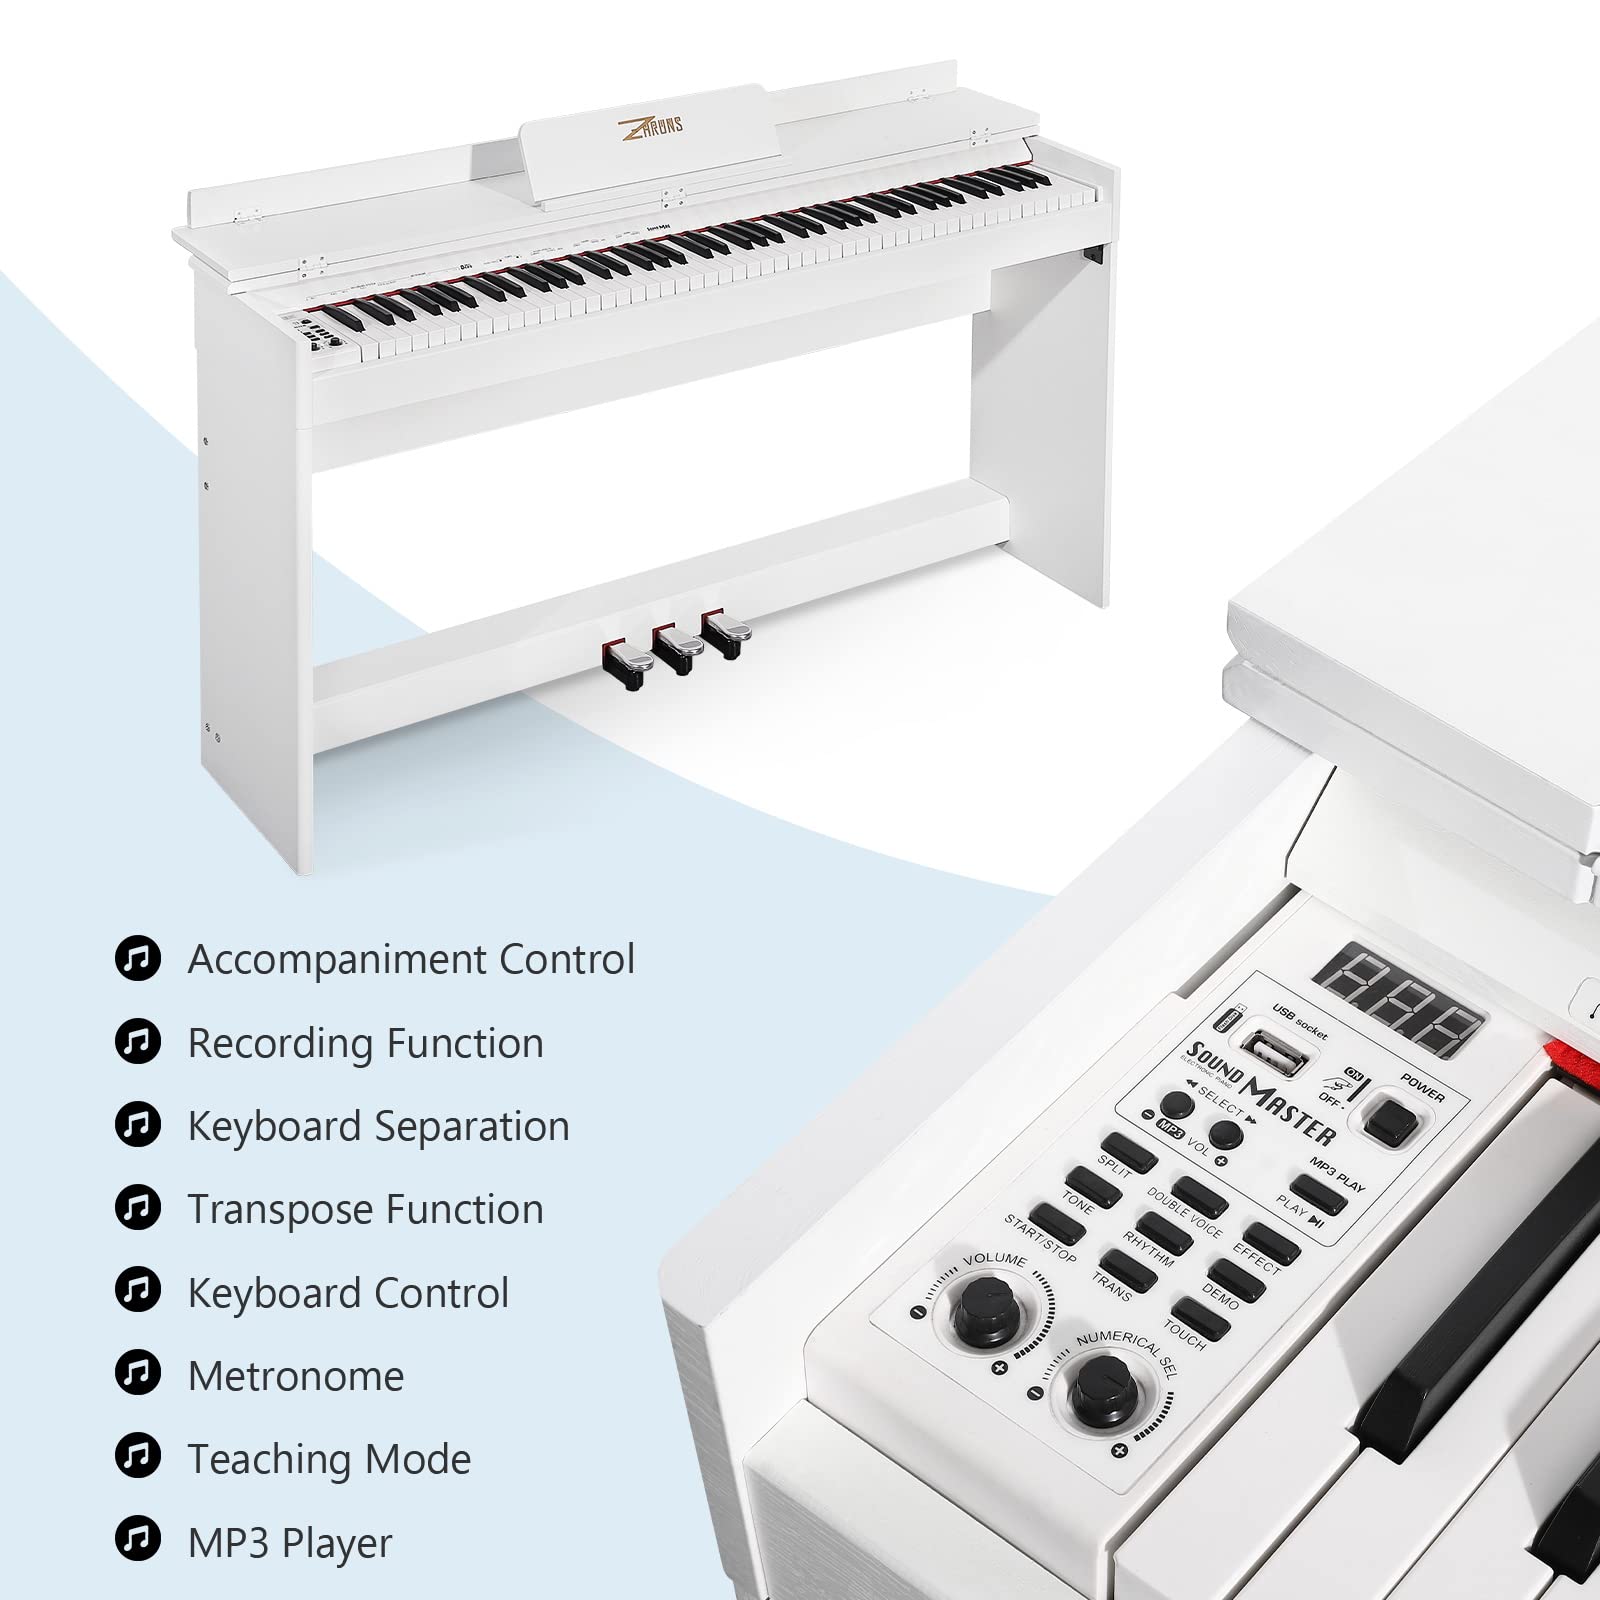 ZHRUNS Digital Piano 88 Key Full-Size Weighted Keyboard Piano,MP3 Function, Remote Control, Power Supply, 3 Pedals, MIDI/Headphone/Audio Output Feature, Suitable for Beginners/Adults